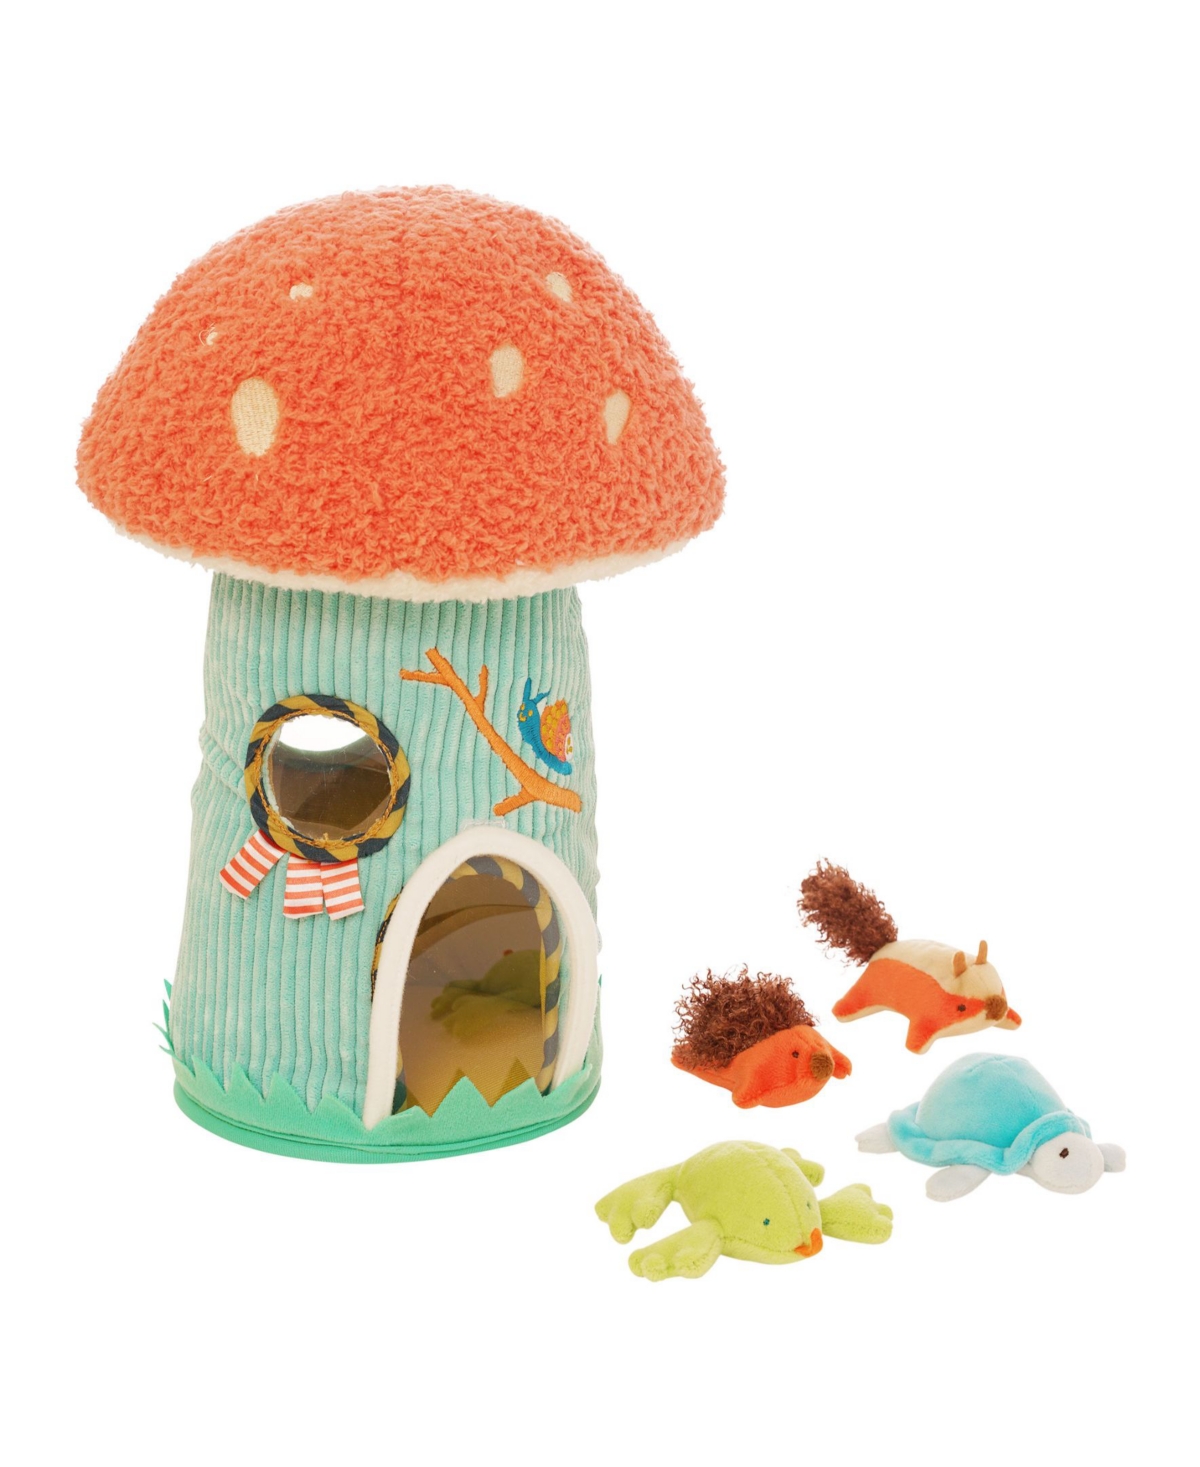 Manhattan Toy Company Toadstool Cottage Plush Activity Toy, 6 Piece In Multi